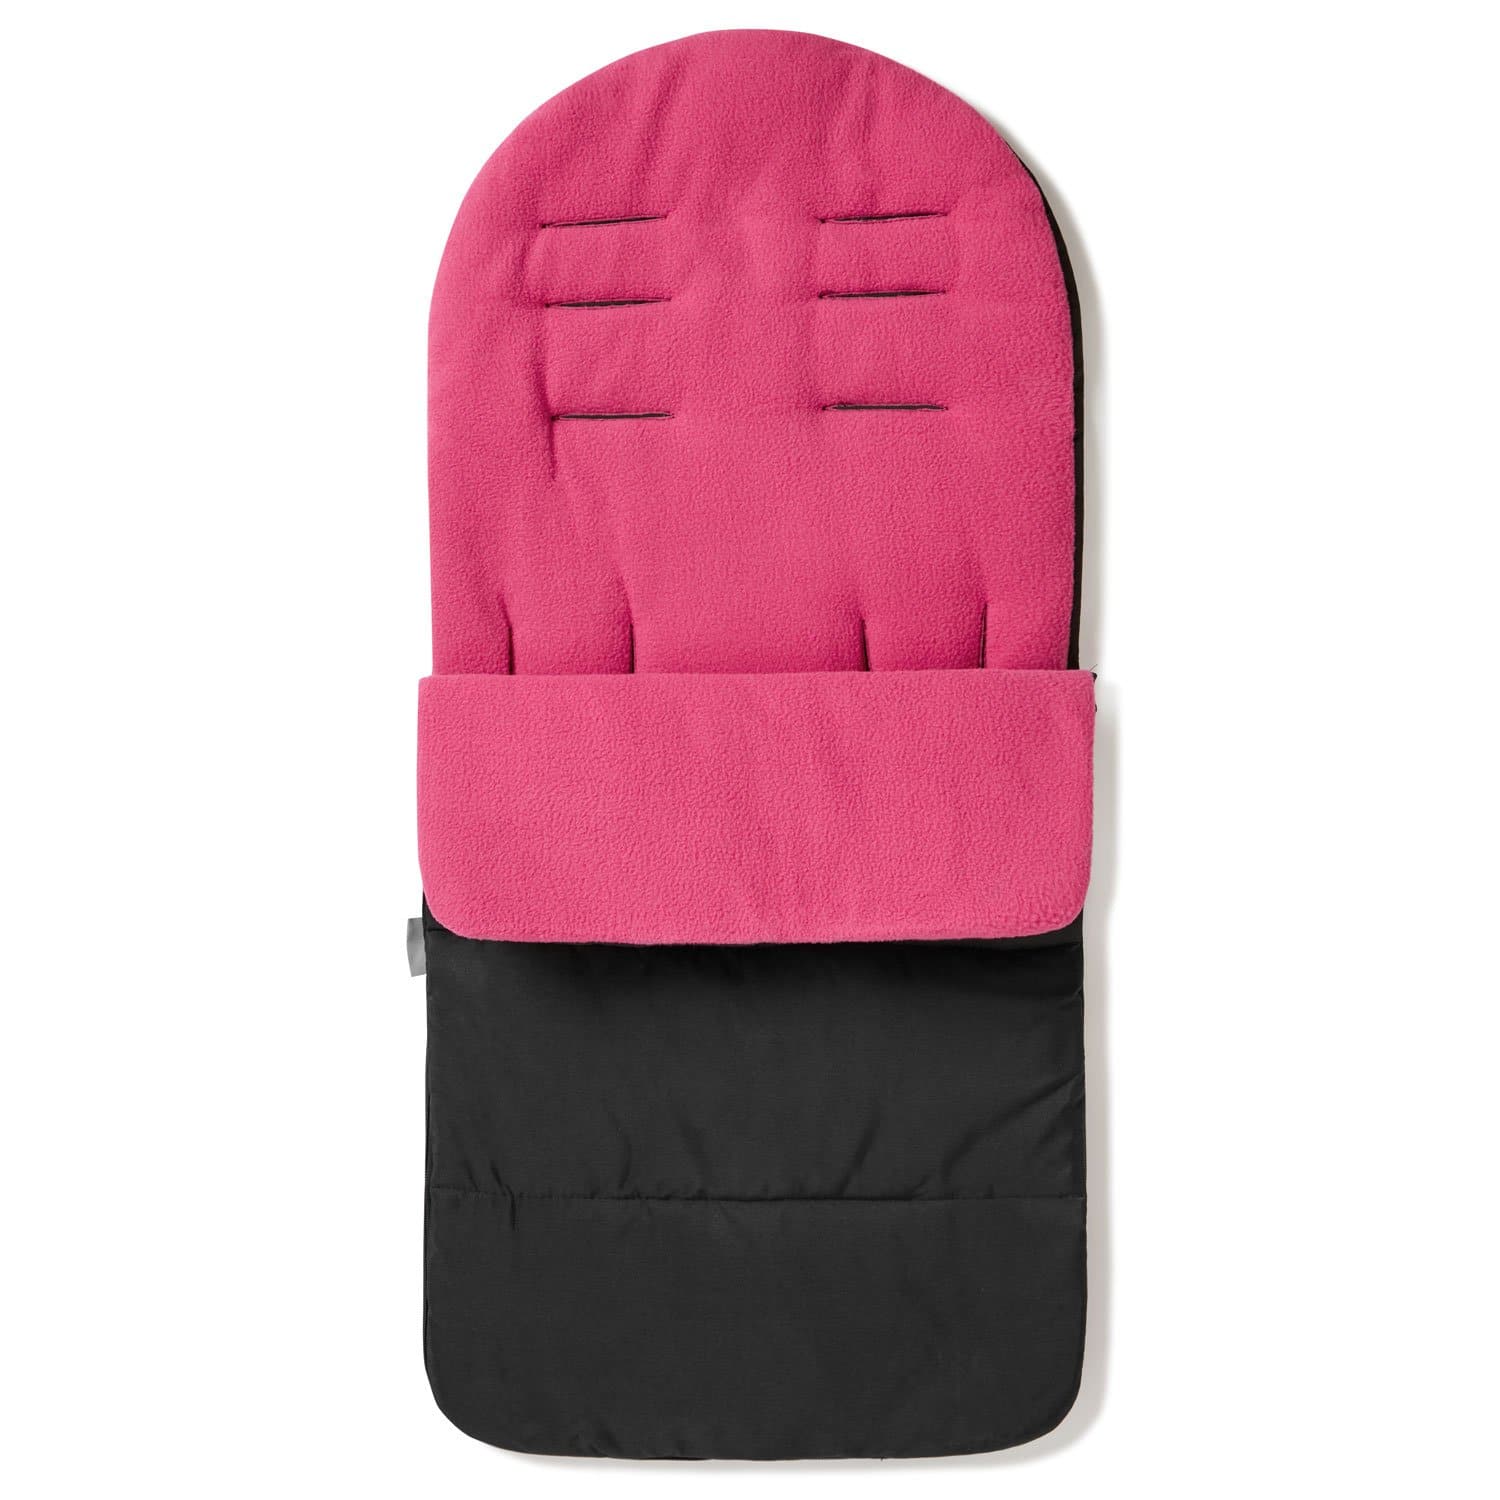 Premium Footmuff / Cosy Toes Compatible with Baby Trend - Pink Rose / Fits All Models | For Your Little One